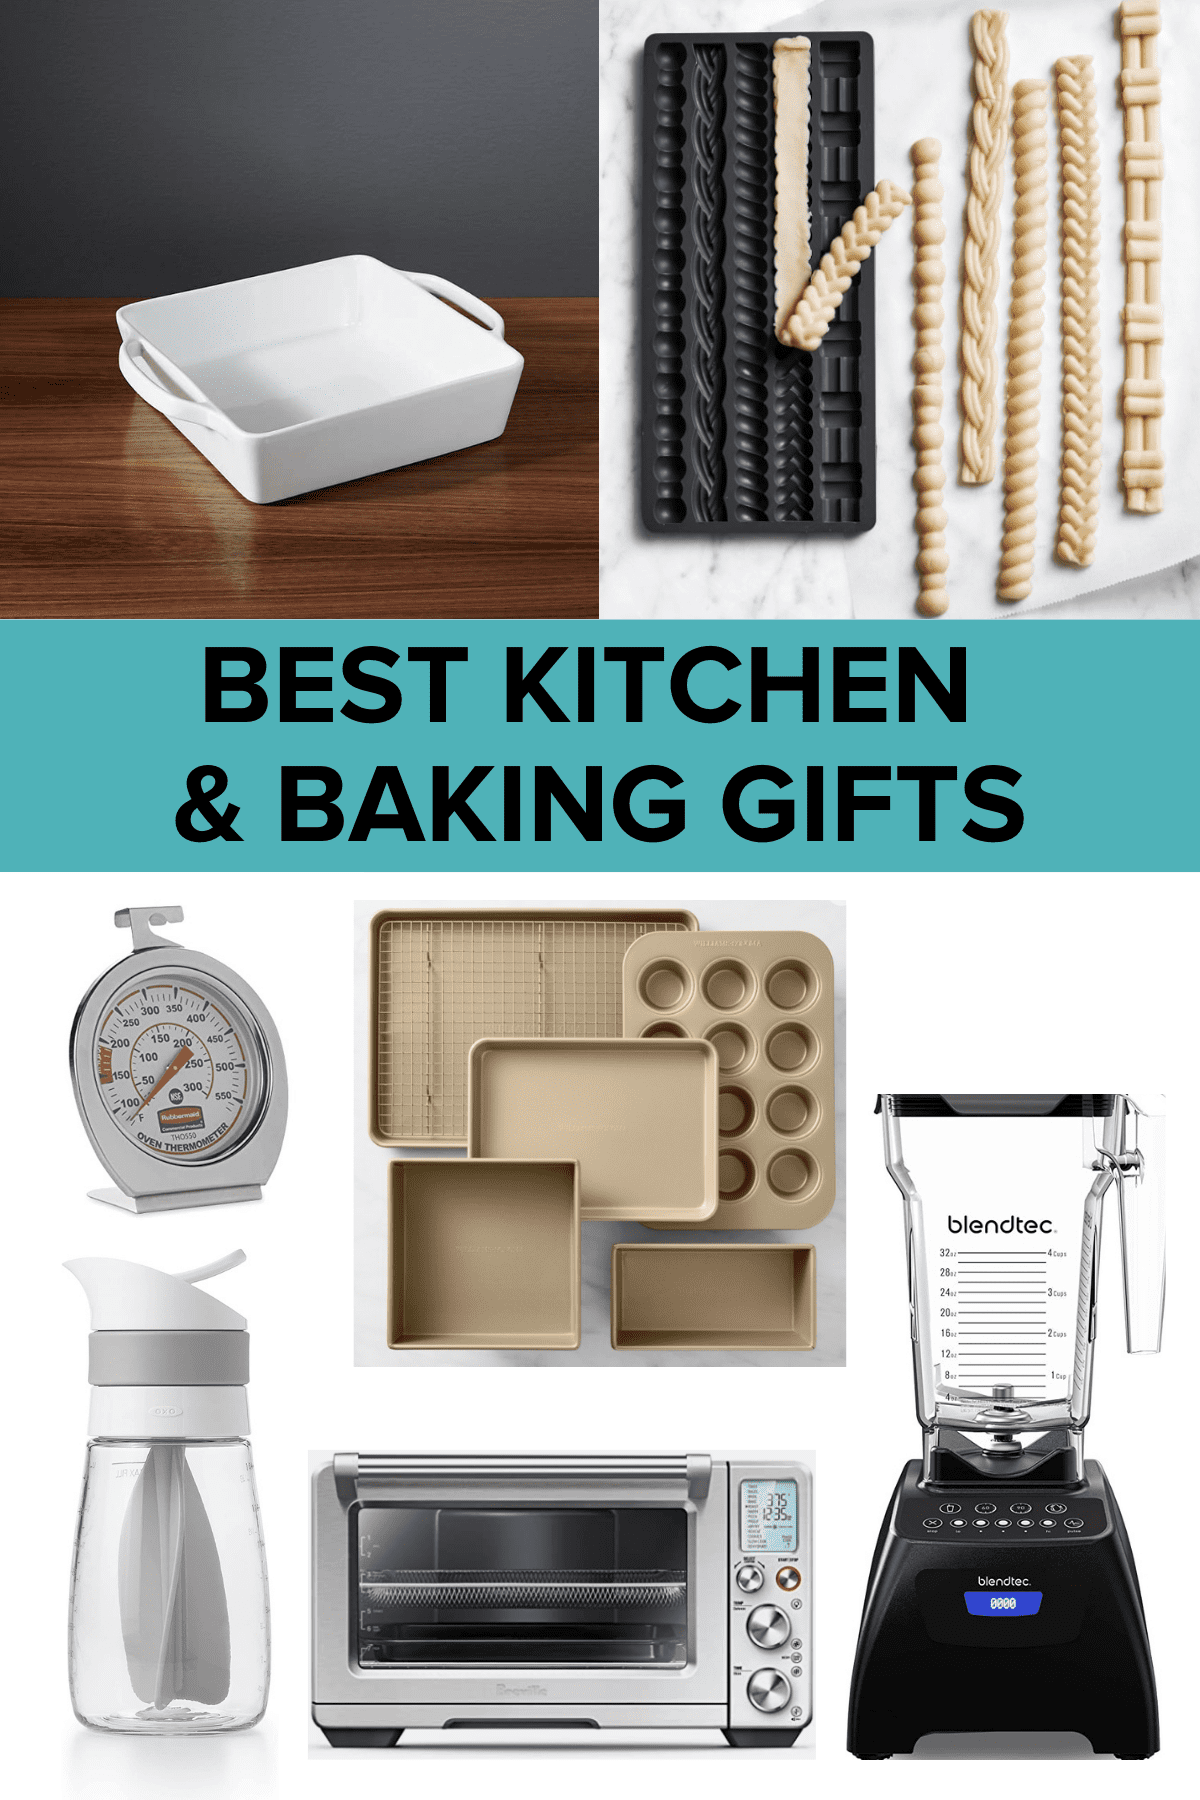 A collage of images featuring best kitchen gifts and baking essentials like a blender, oven thermometer, baking dishes and kitchen appliances.